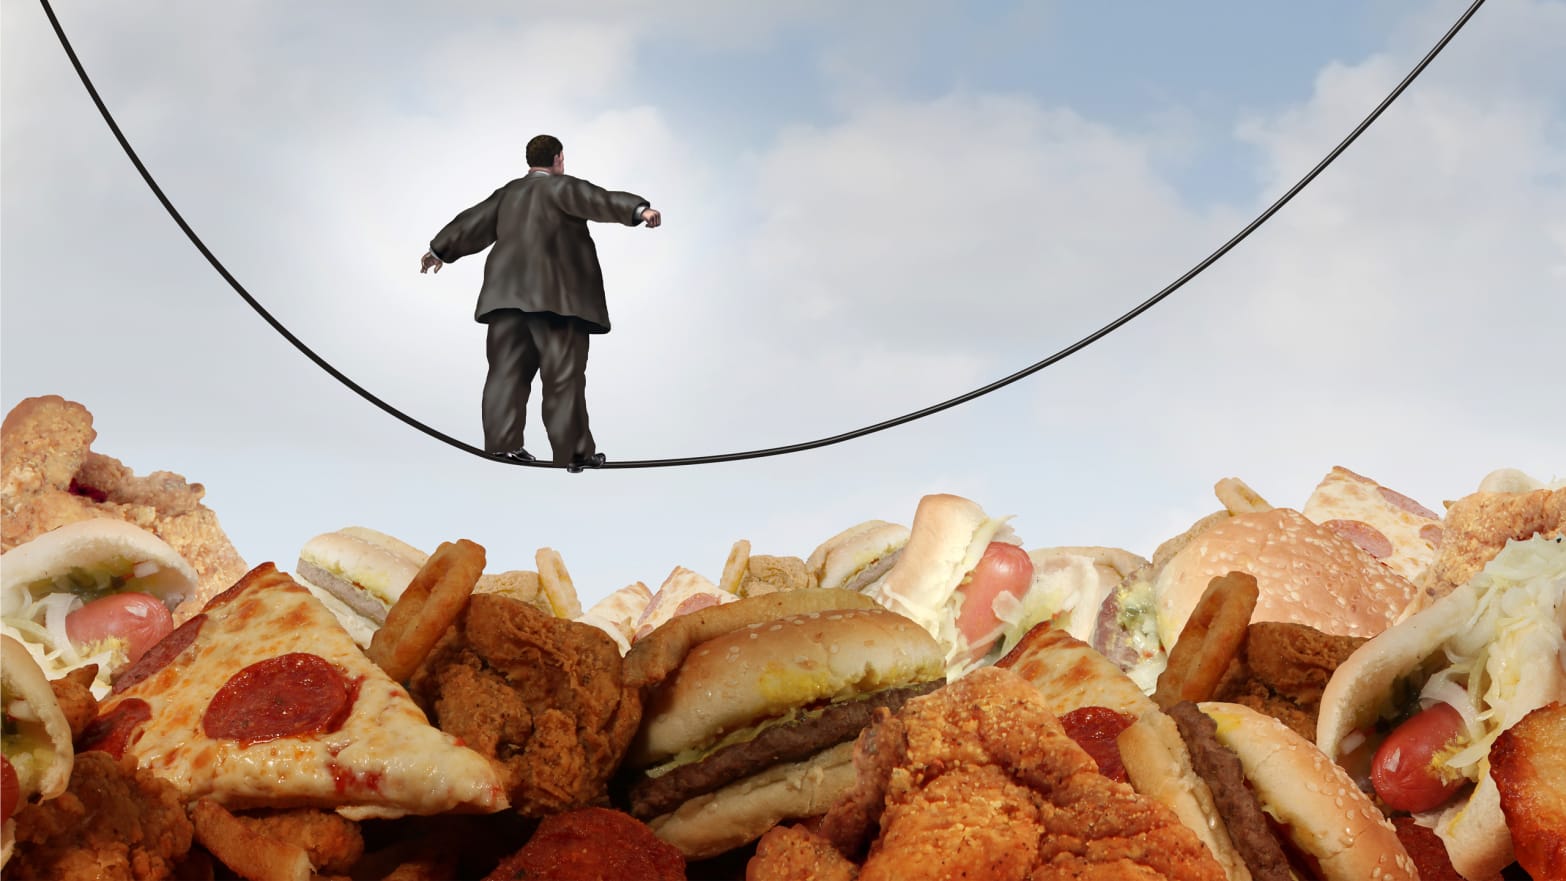 image of overweight man in a suit walking a tightrope over fast food like pizza onion rings chicken nuggets fried hamburgers obesity obese cancer gallbladder baby boomer